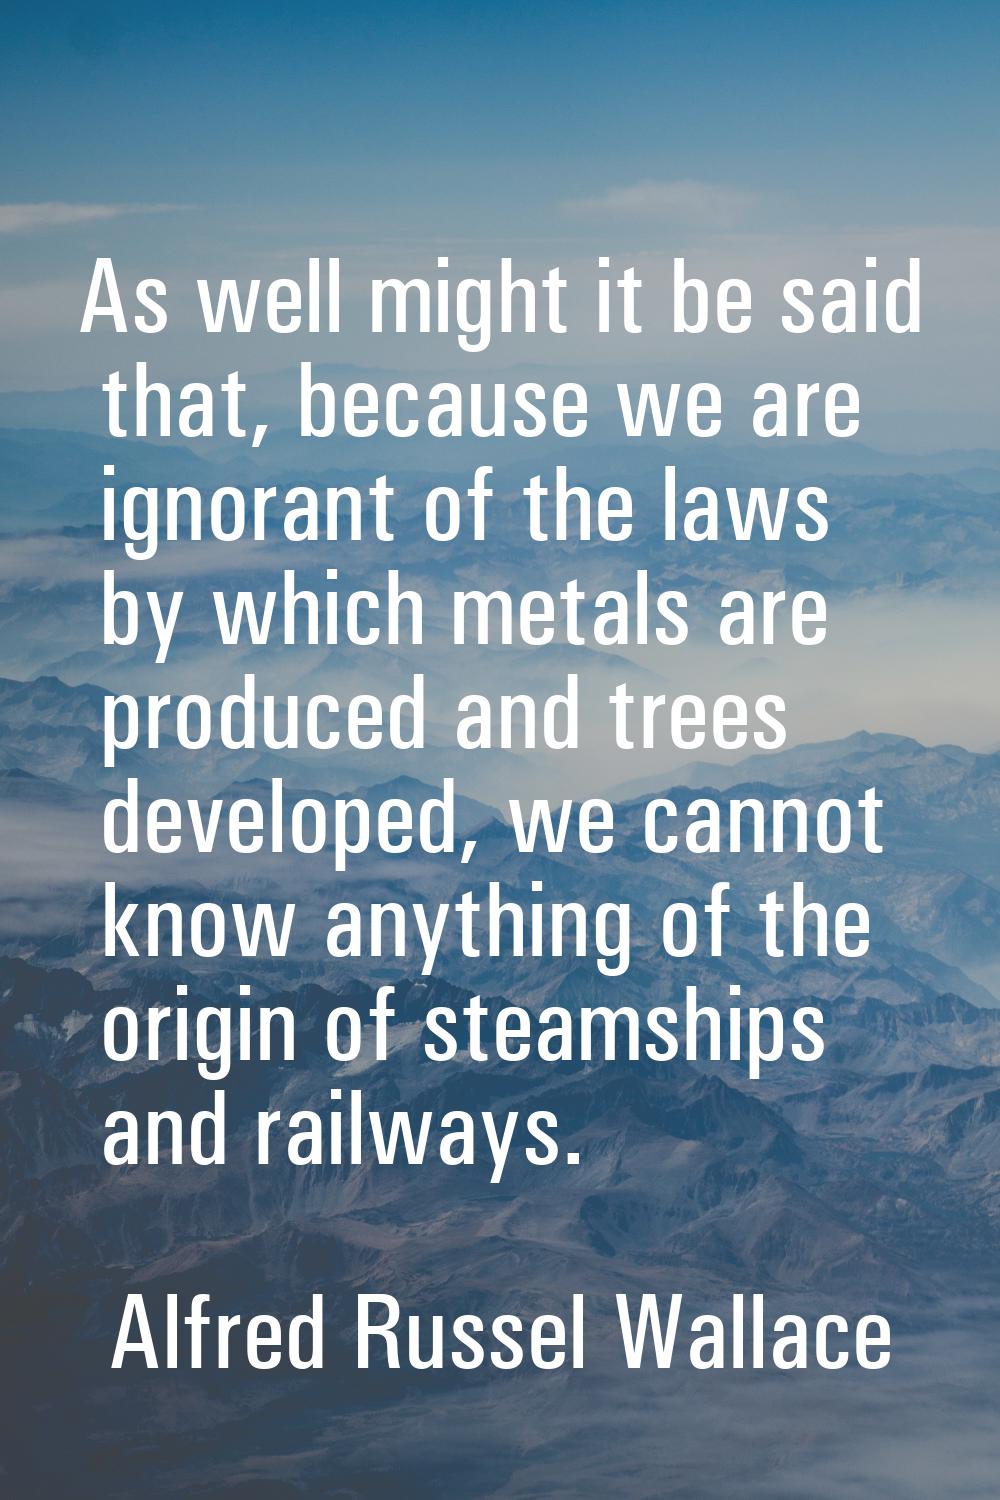 As well might it be said that, because we are ignorant of the laws by which metals are produced and